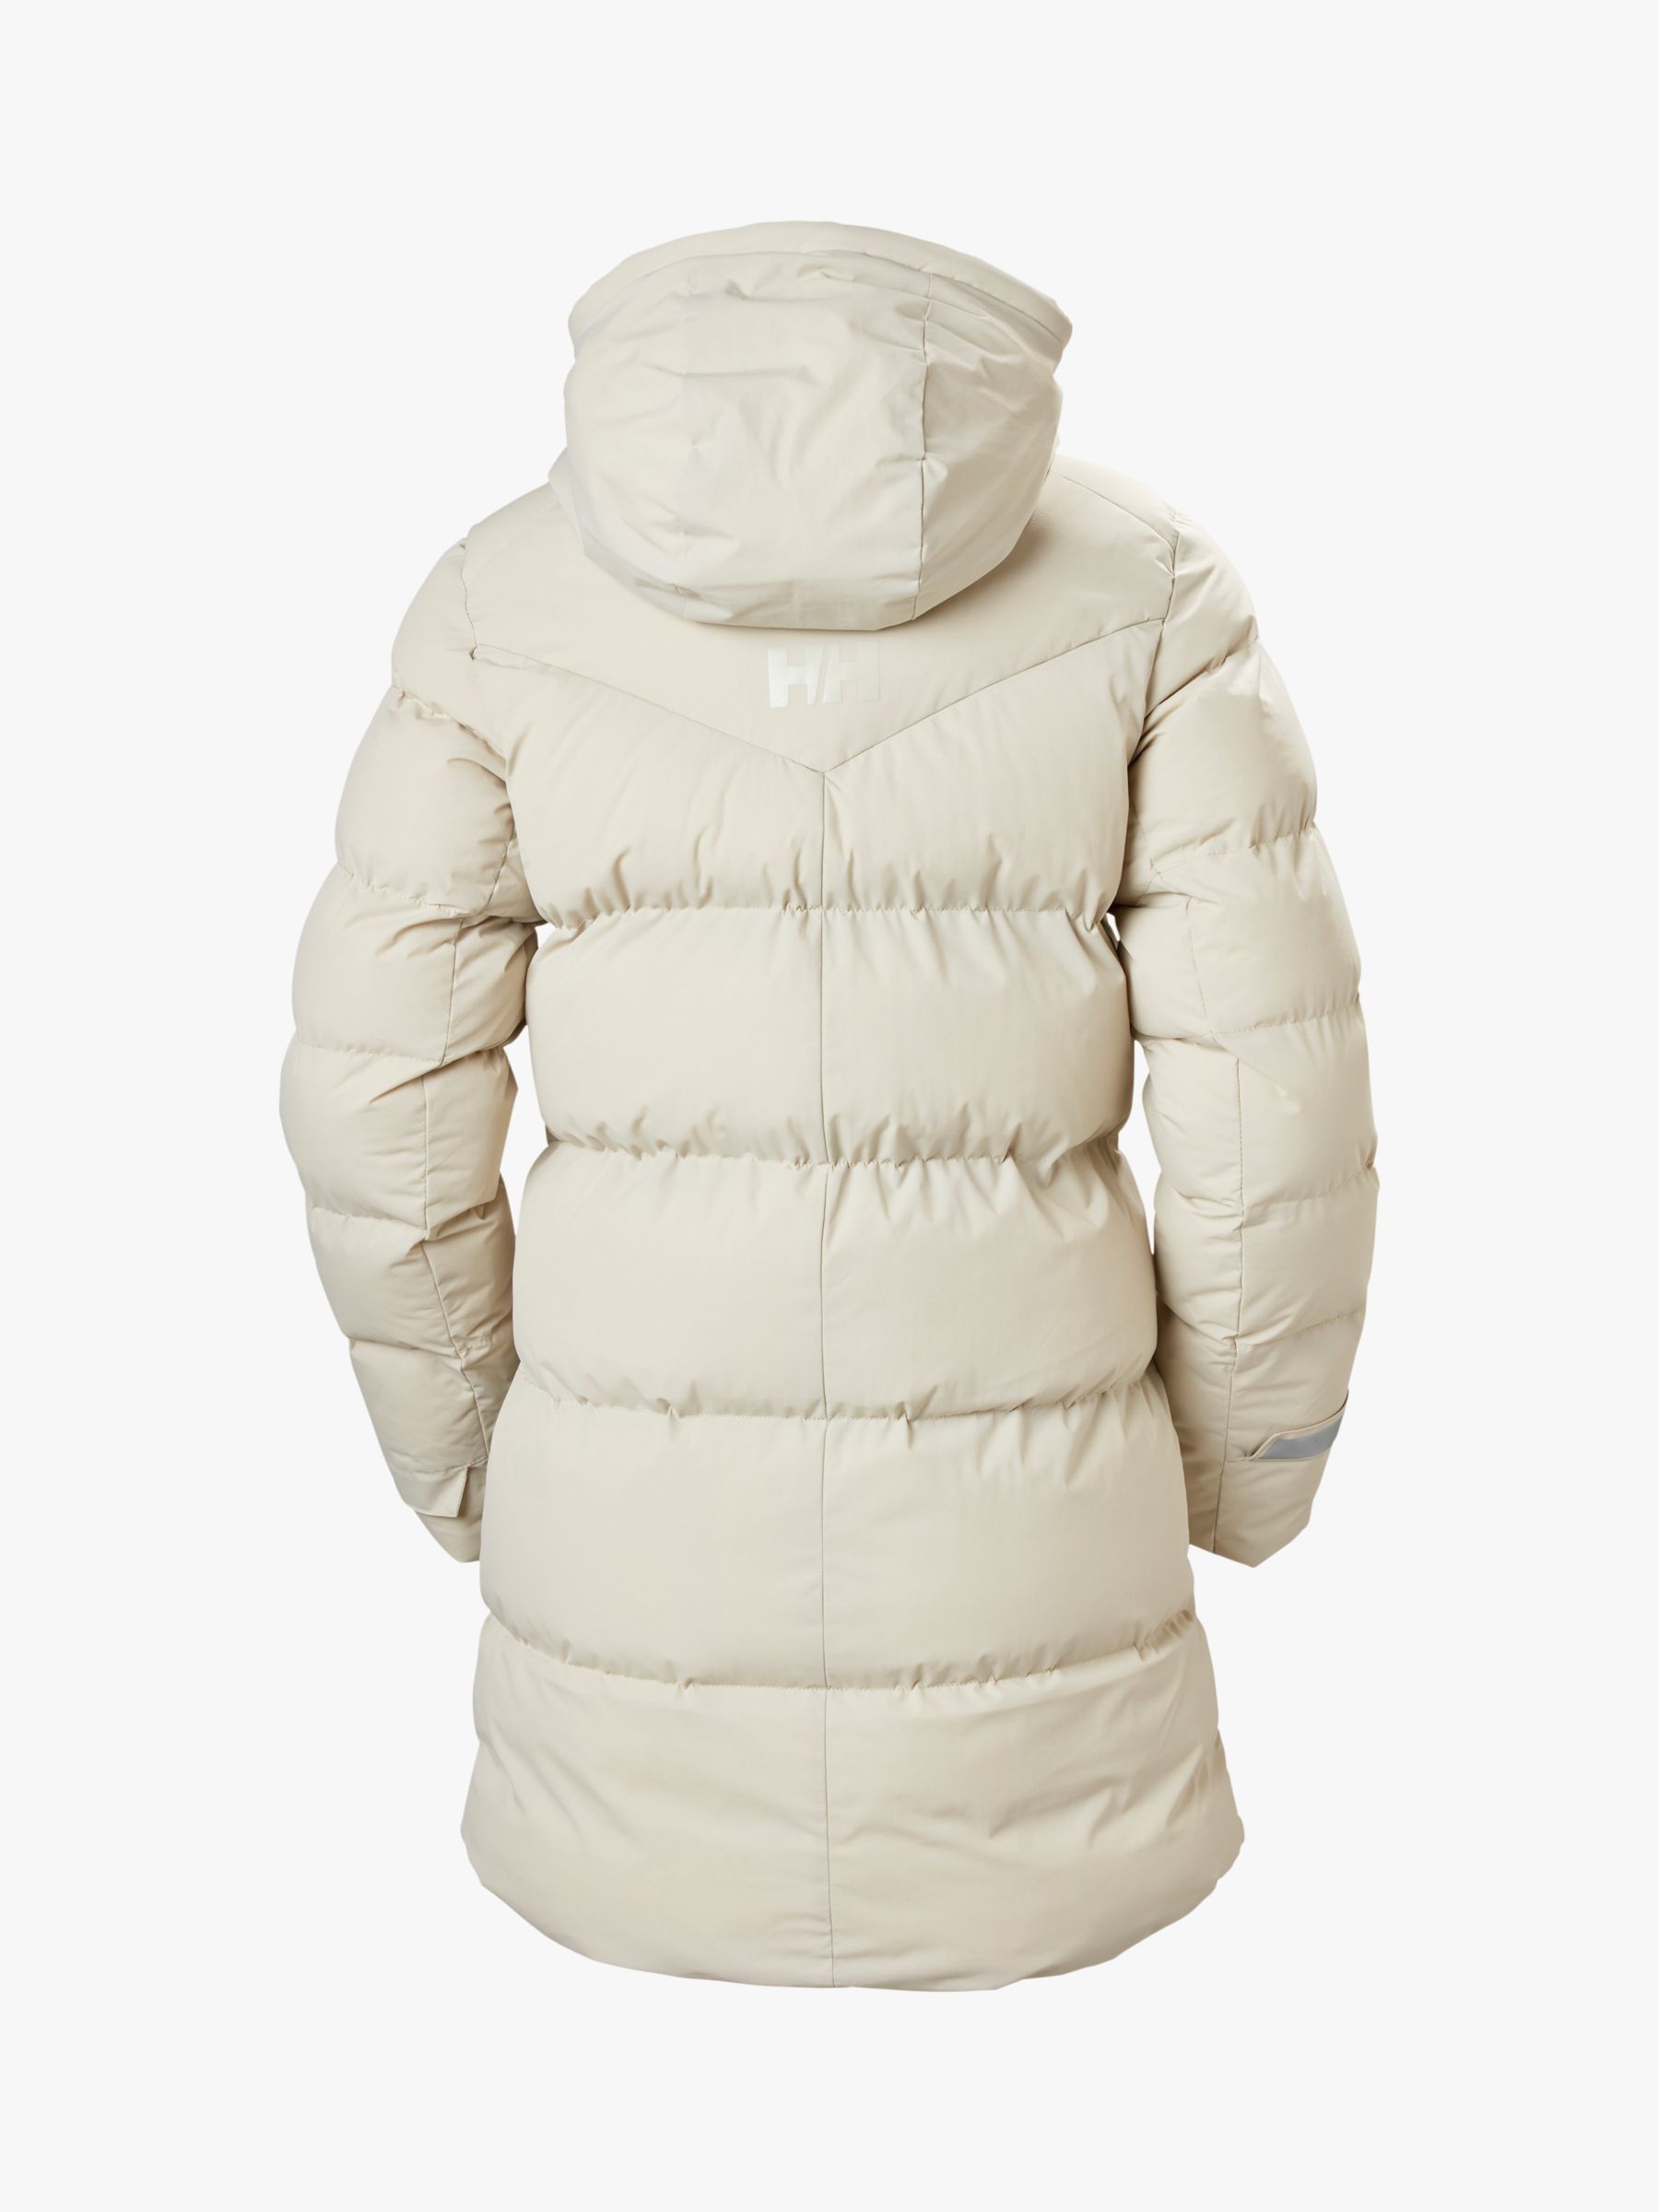 Helly Hansen Adore Puffy Women's Insulated Parka Jacket, Pelican at ...